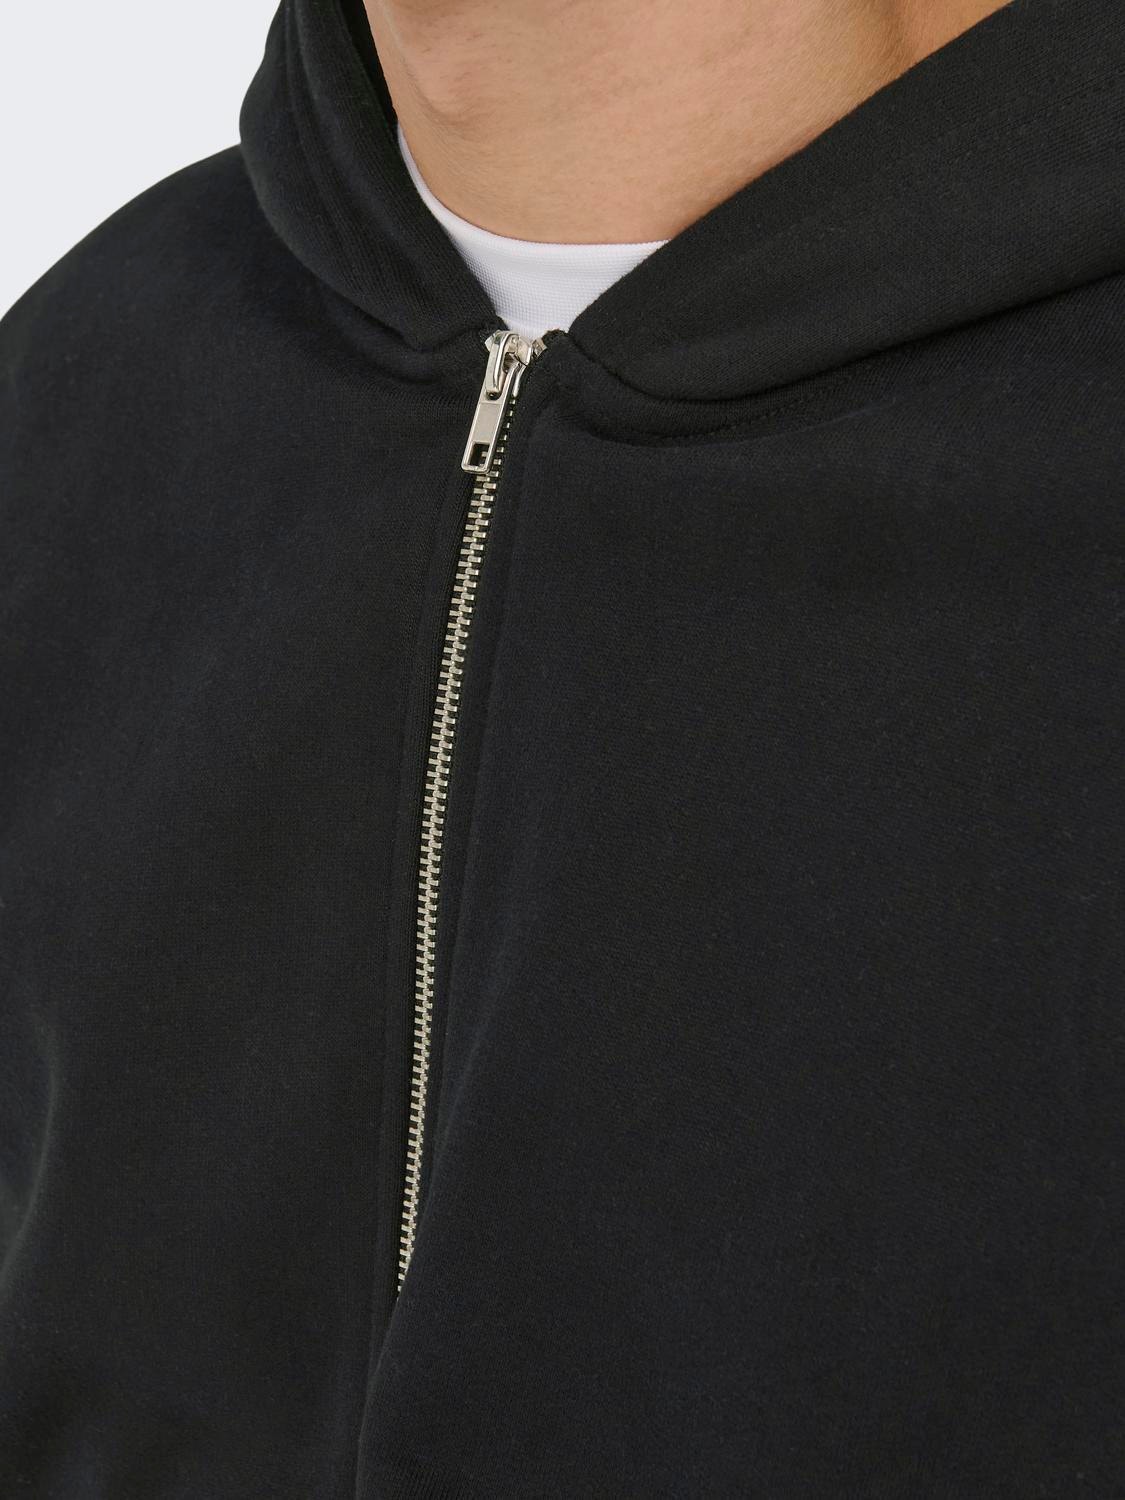 ONLY & SONS Hoodie with full zip -Black - 22028837